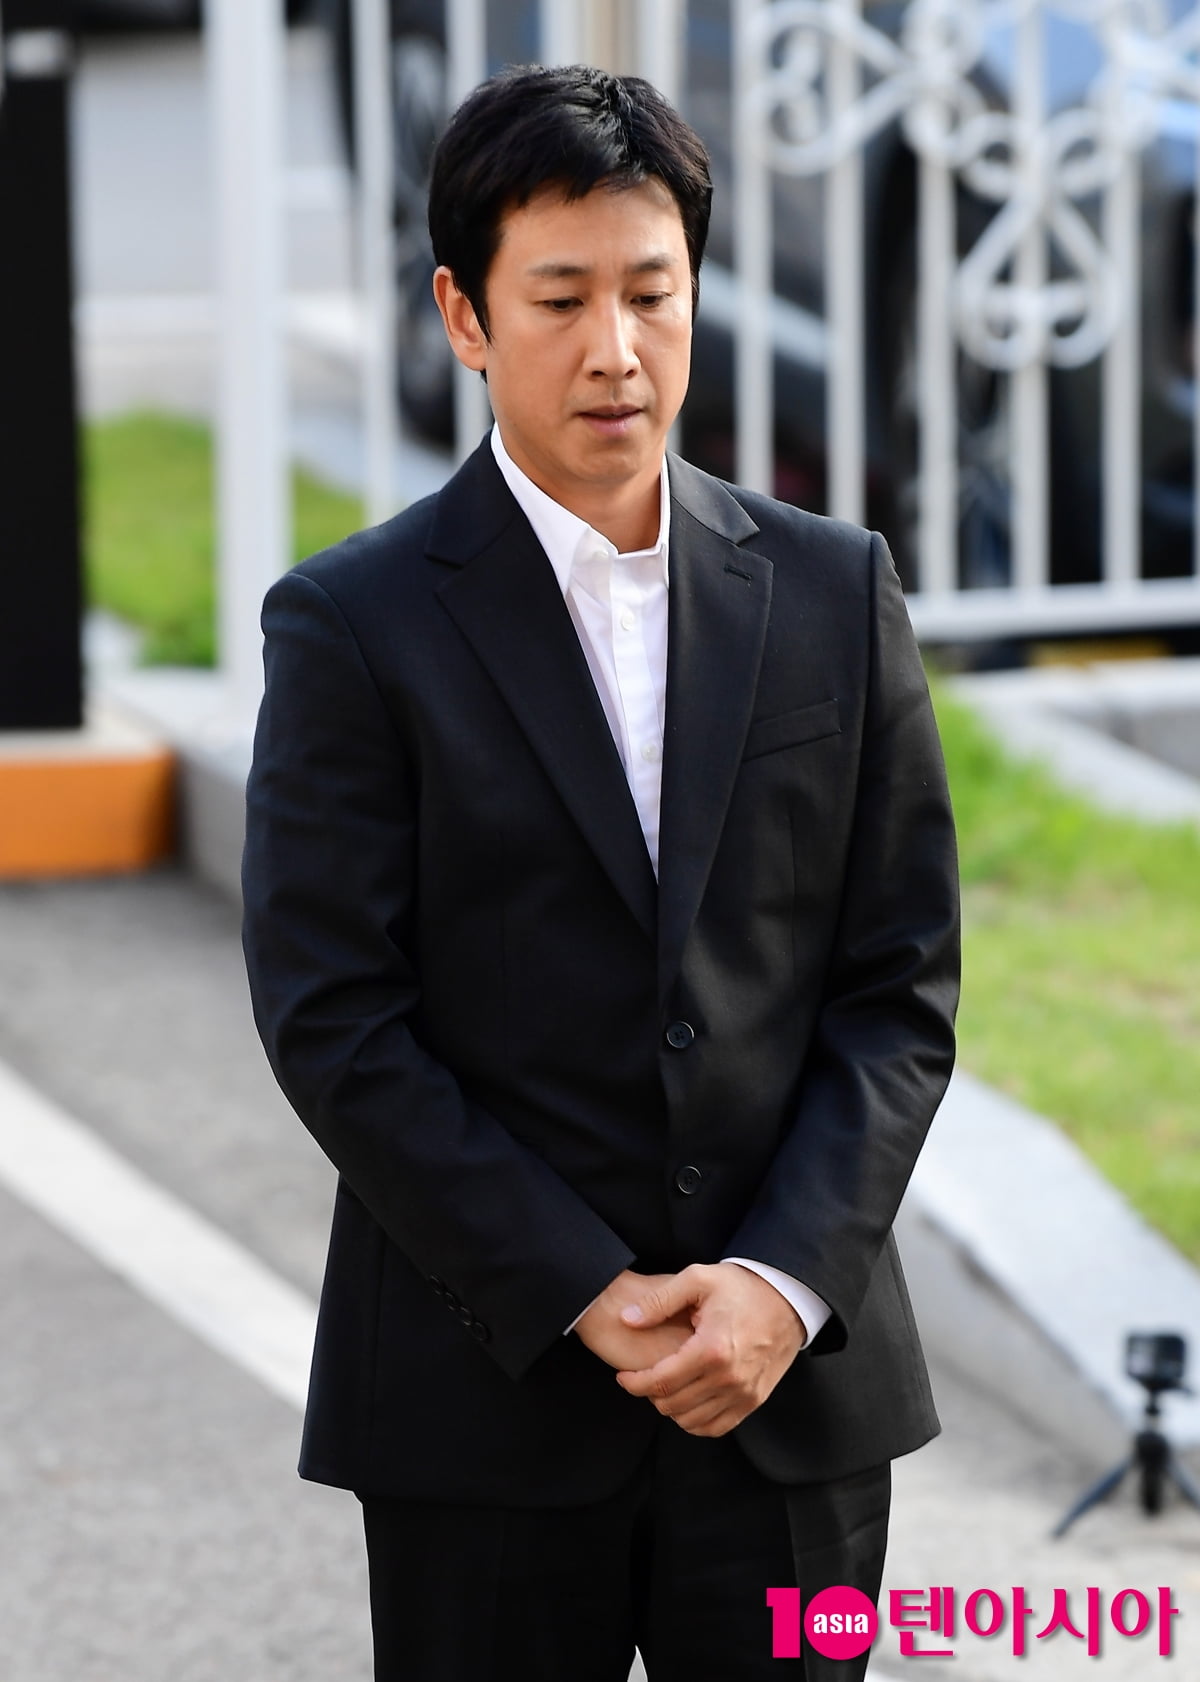 Lee Sun-gyun returns home after one hour of police investigation, "I already submitted my cell phone, I'm sorry for disappointing you."